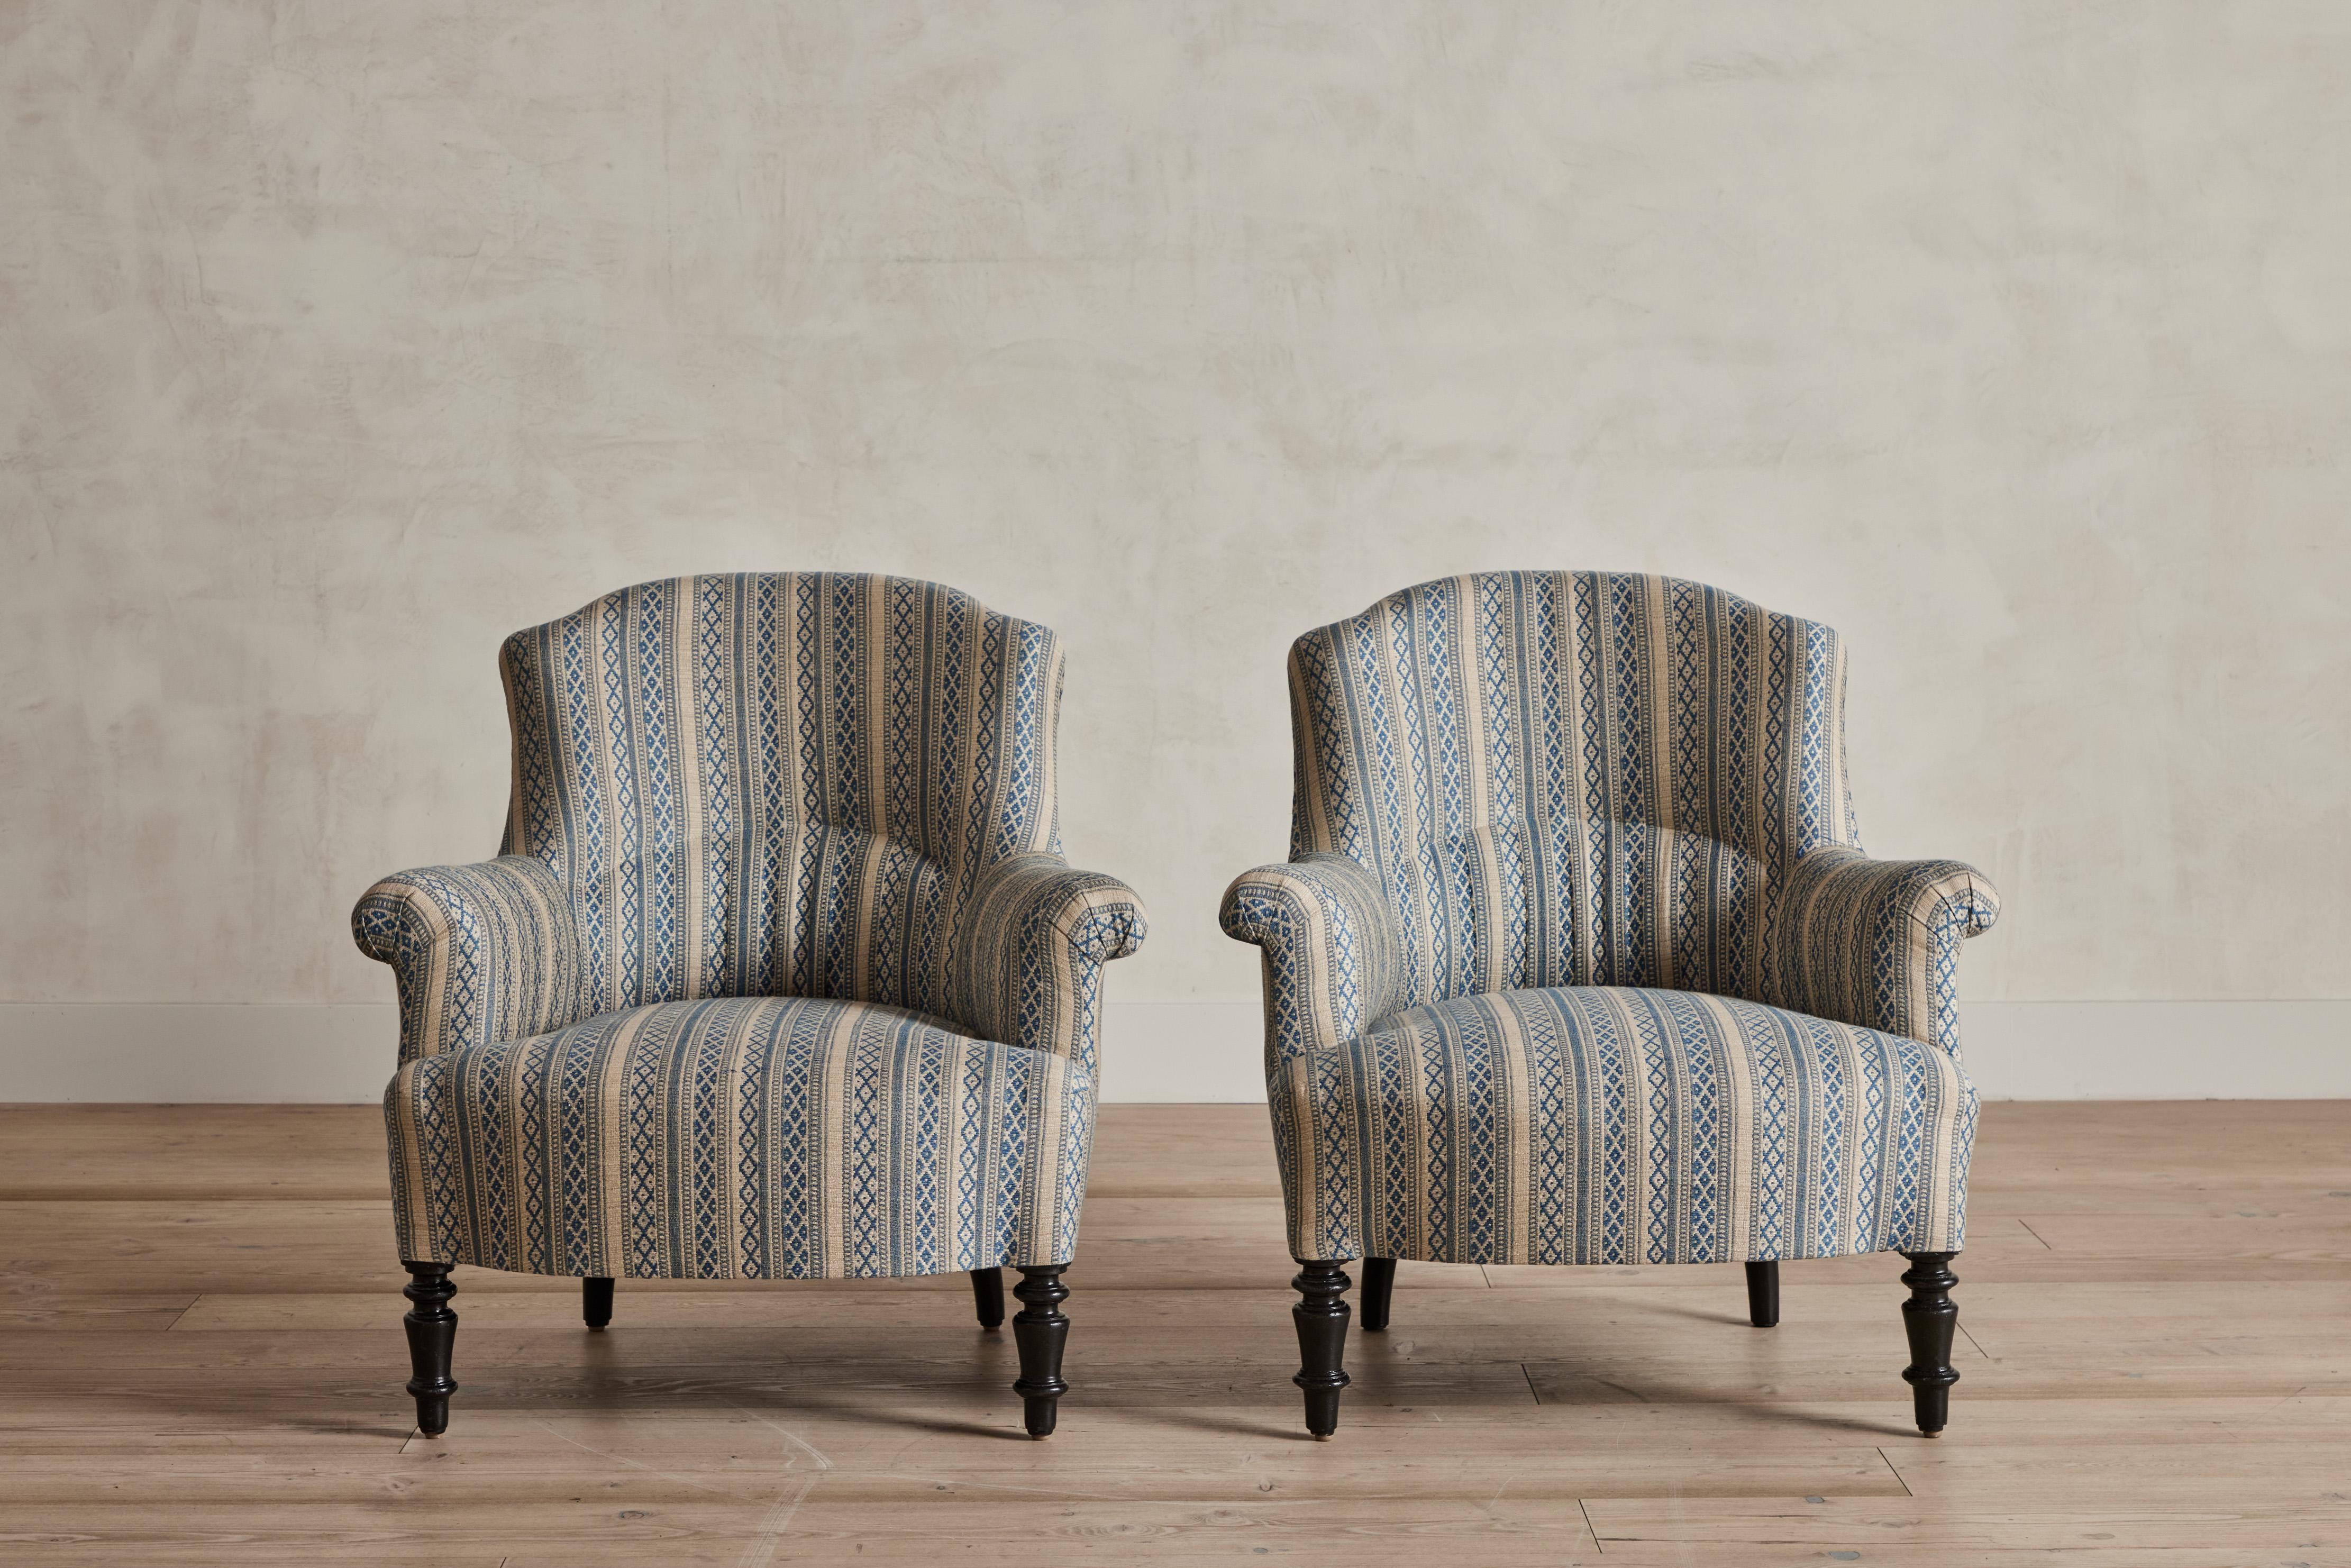 Pair of Napoleon III armchairs from France newly upholstered in Zoe weave in indigo and ivory by Susan Deliss. Wear on wood legs is consistent with age and use. Good vintage condition. New fabric upholstery. Wear on legs and base consistent with age